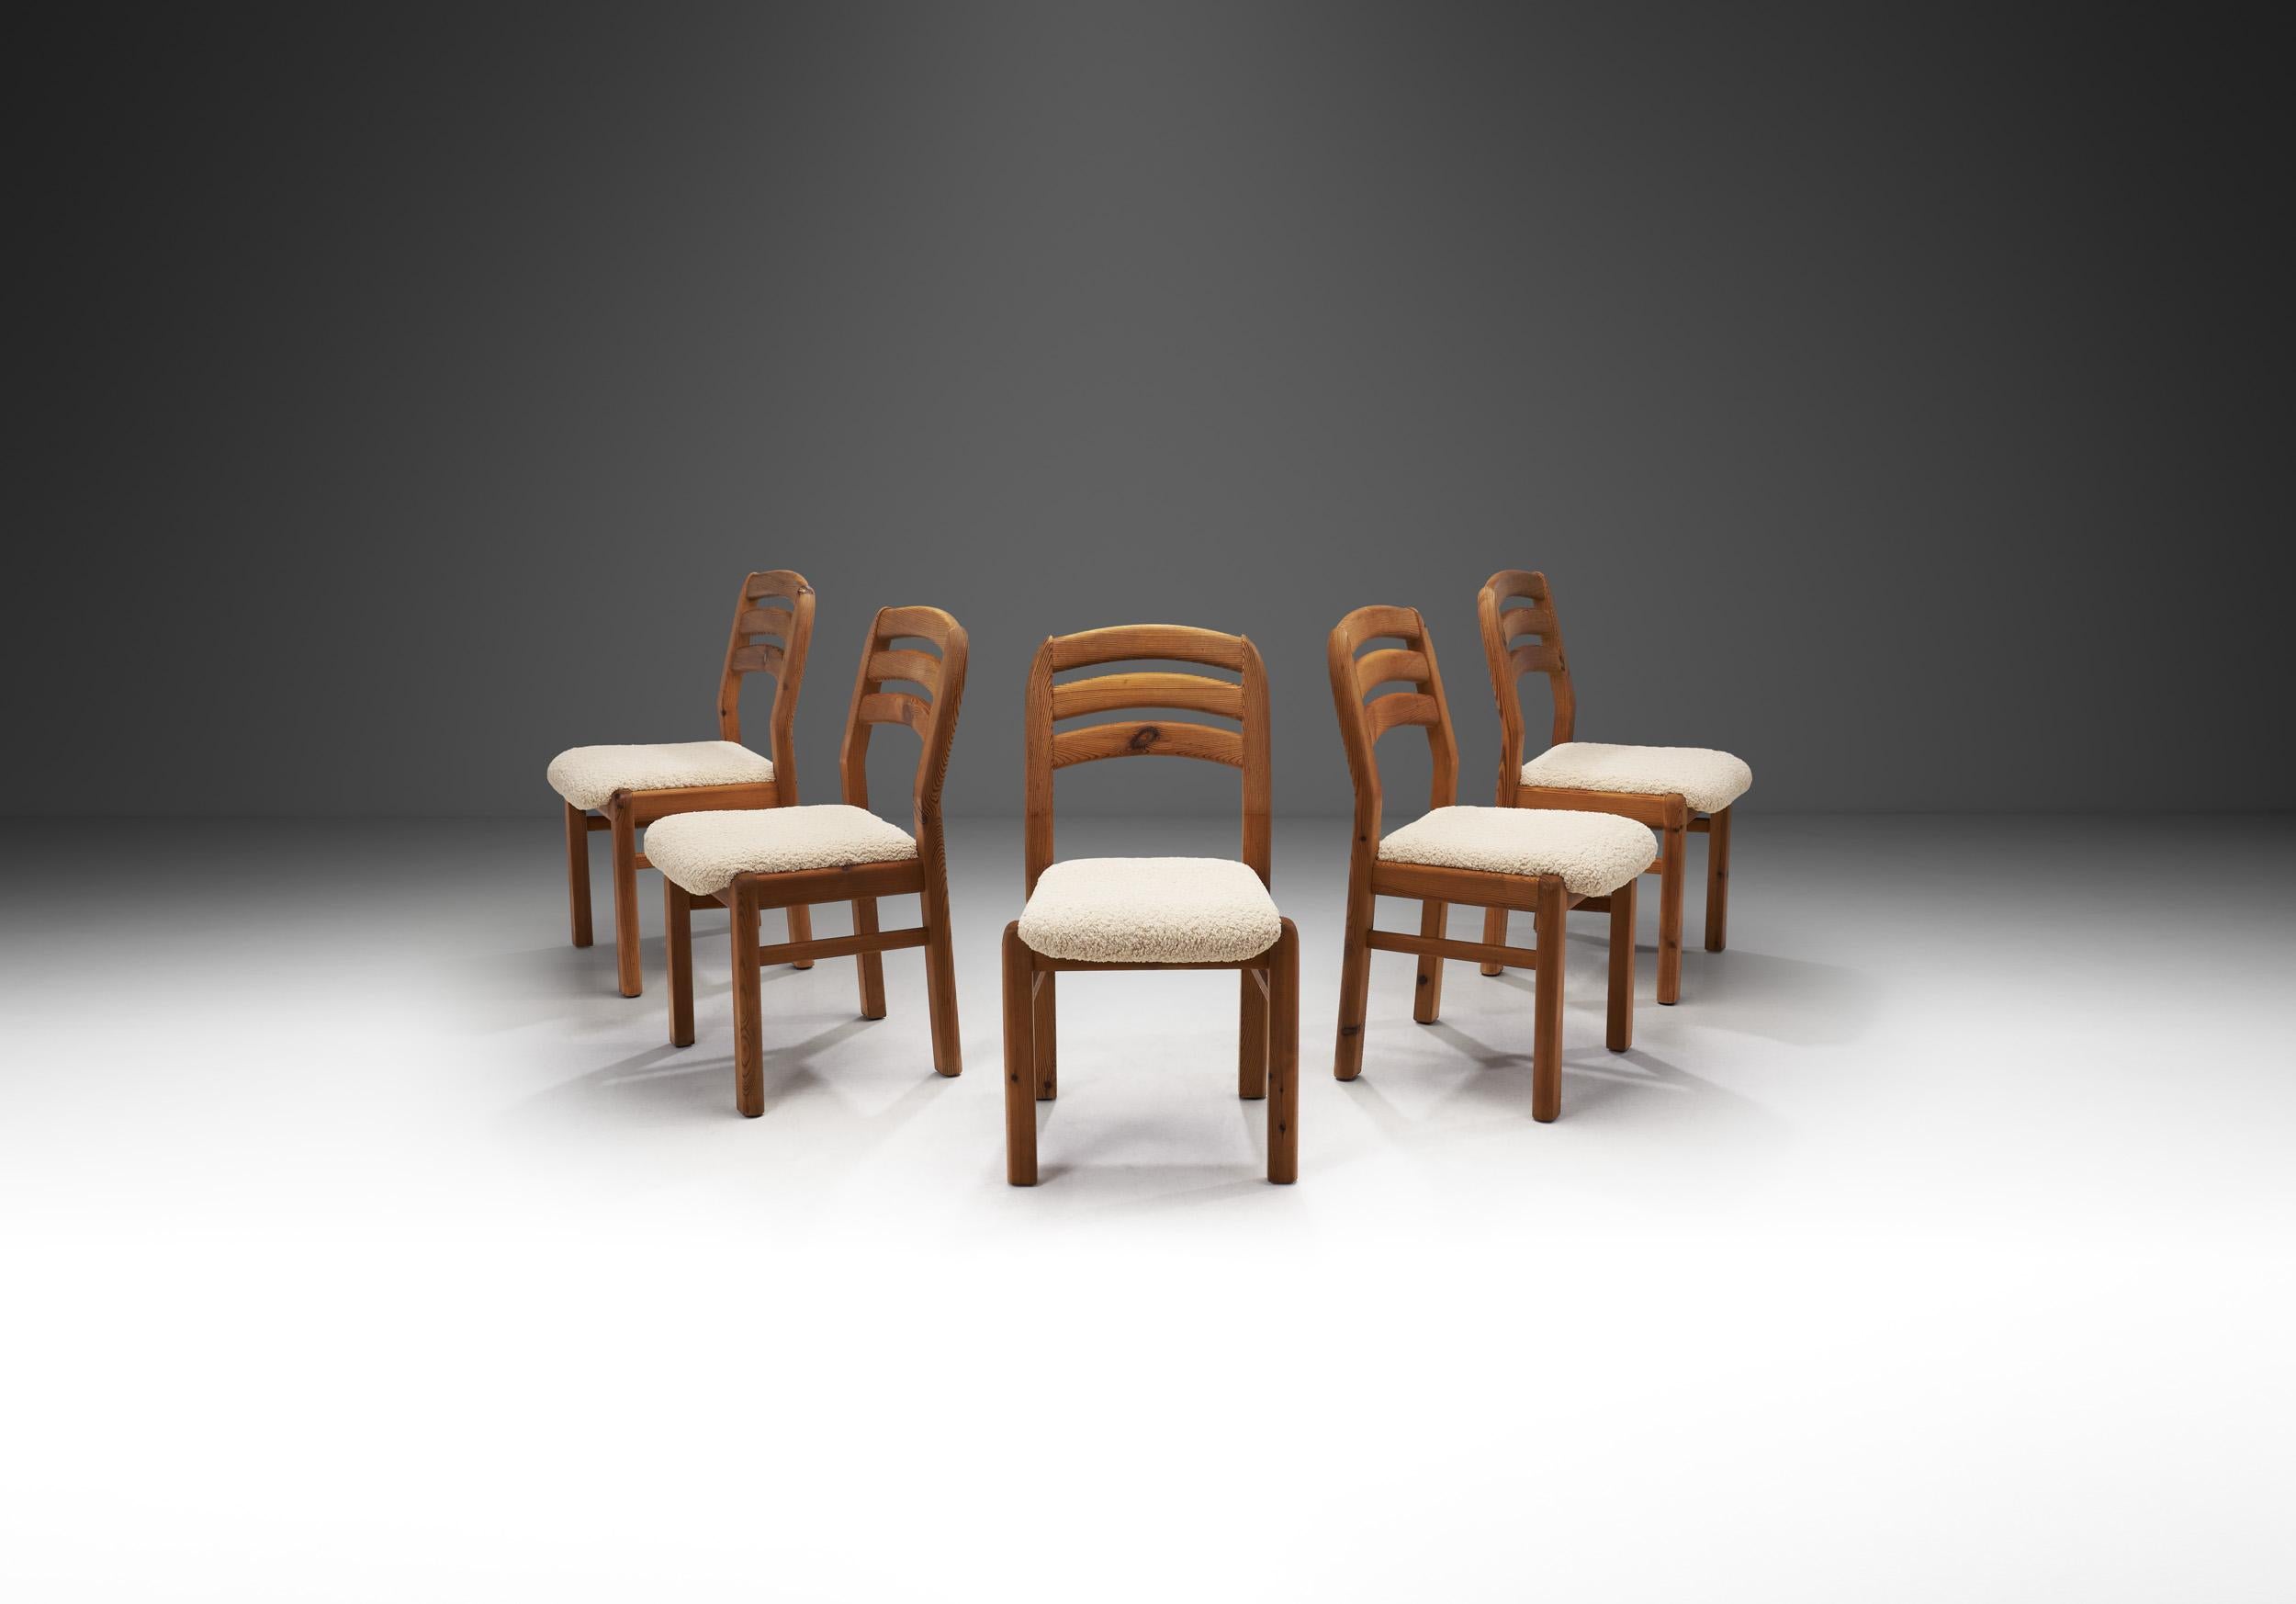 Wood, in many ways, is more valuable than other materials used in furniture manufacturing because its natural grain guarantees that each piece is unique. This is especially important in the case of this set of five, as each chair is unique but